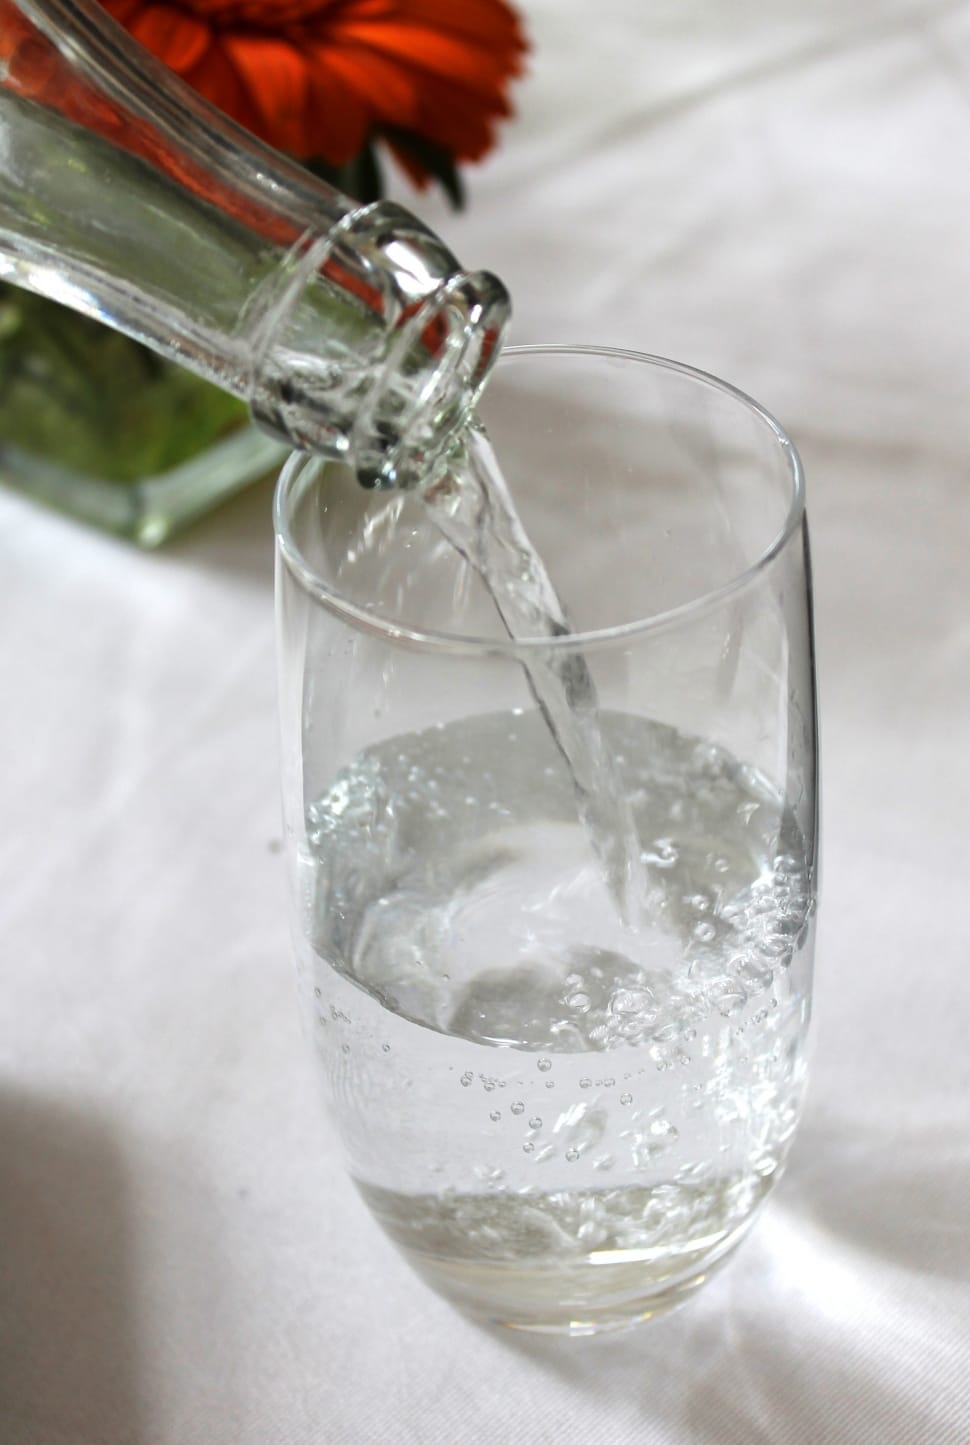 Clear Drinking Glass With Water Preview - ฉี่ บ่อย กิน อะไร หาย , HD Wallpaper & Backgrounds